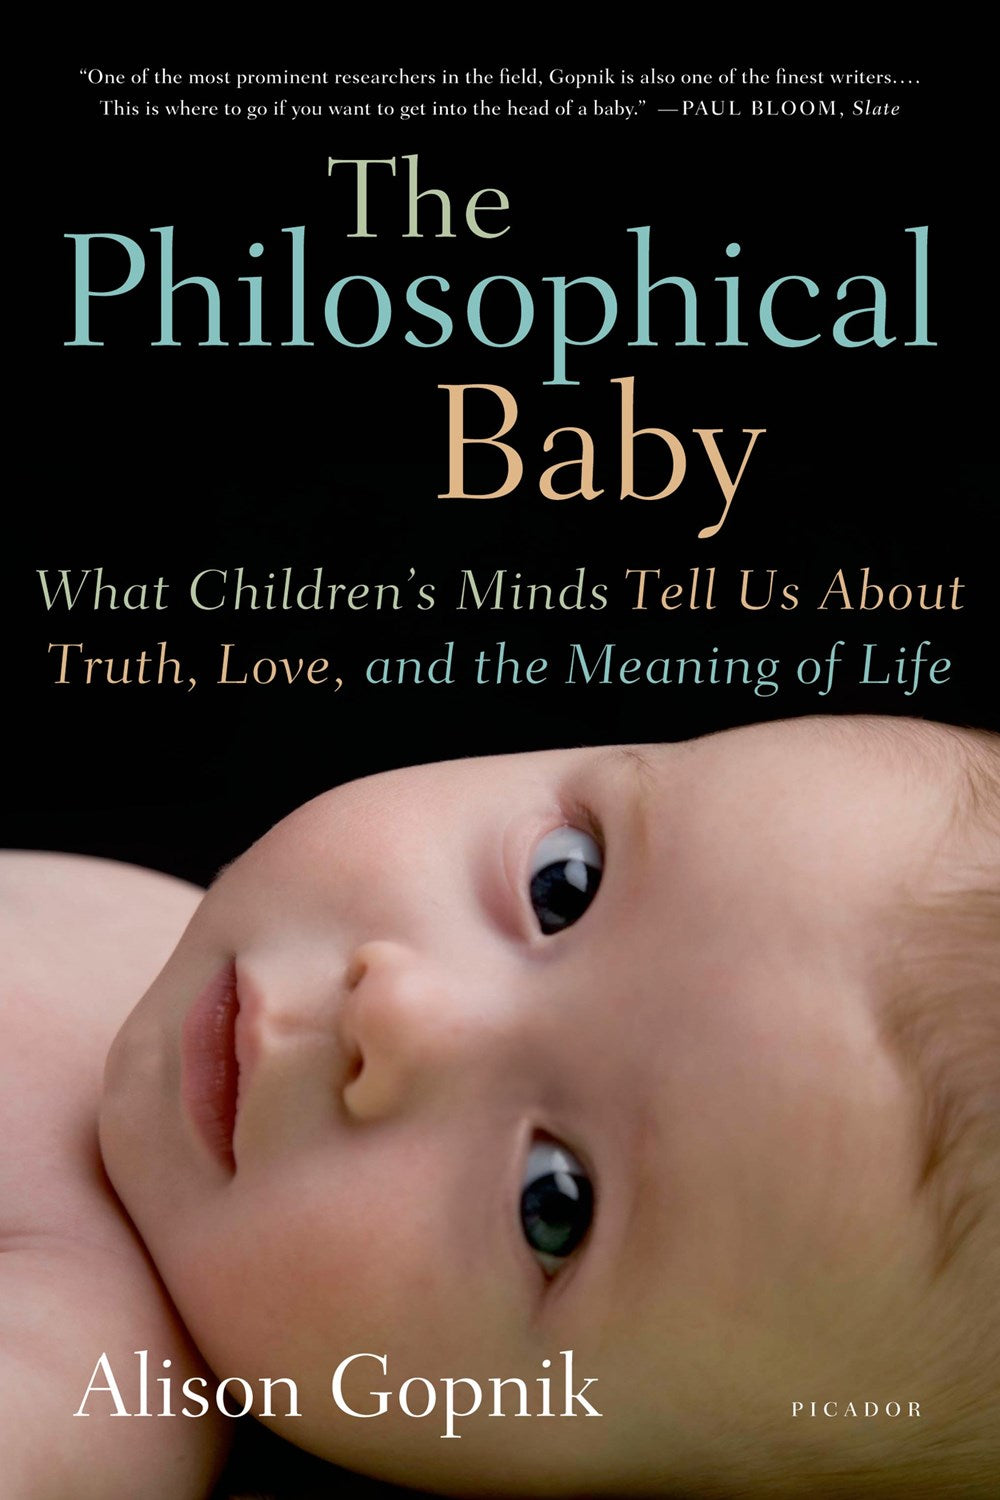 The Philosophical Baby: What Children's Minds Tell Us About Truth, Love, and the Meaning of Life by Alison Gopnik